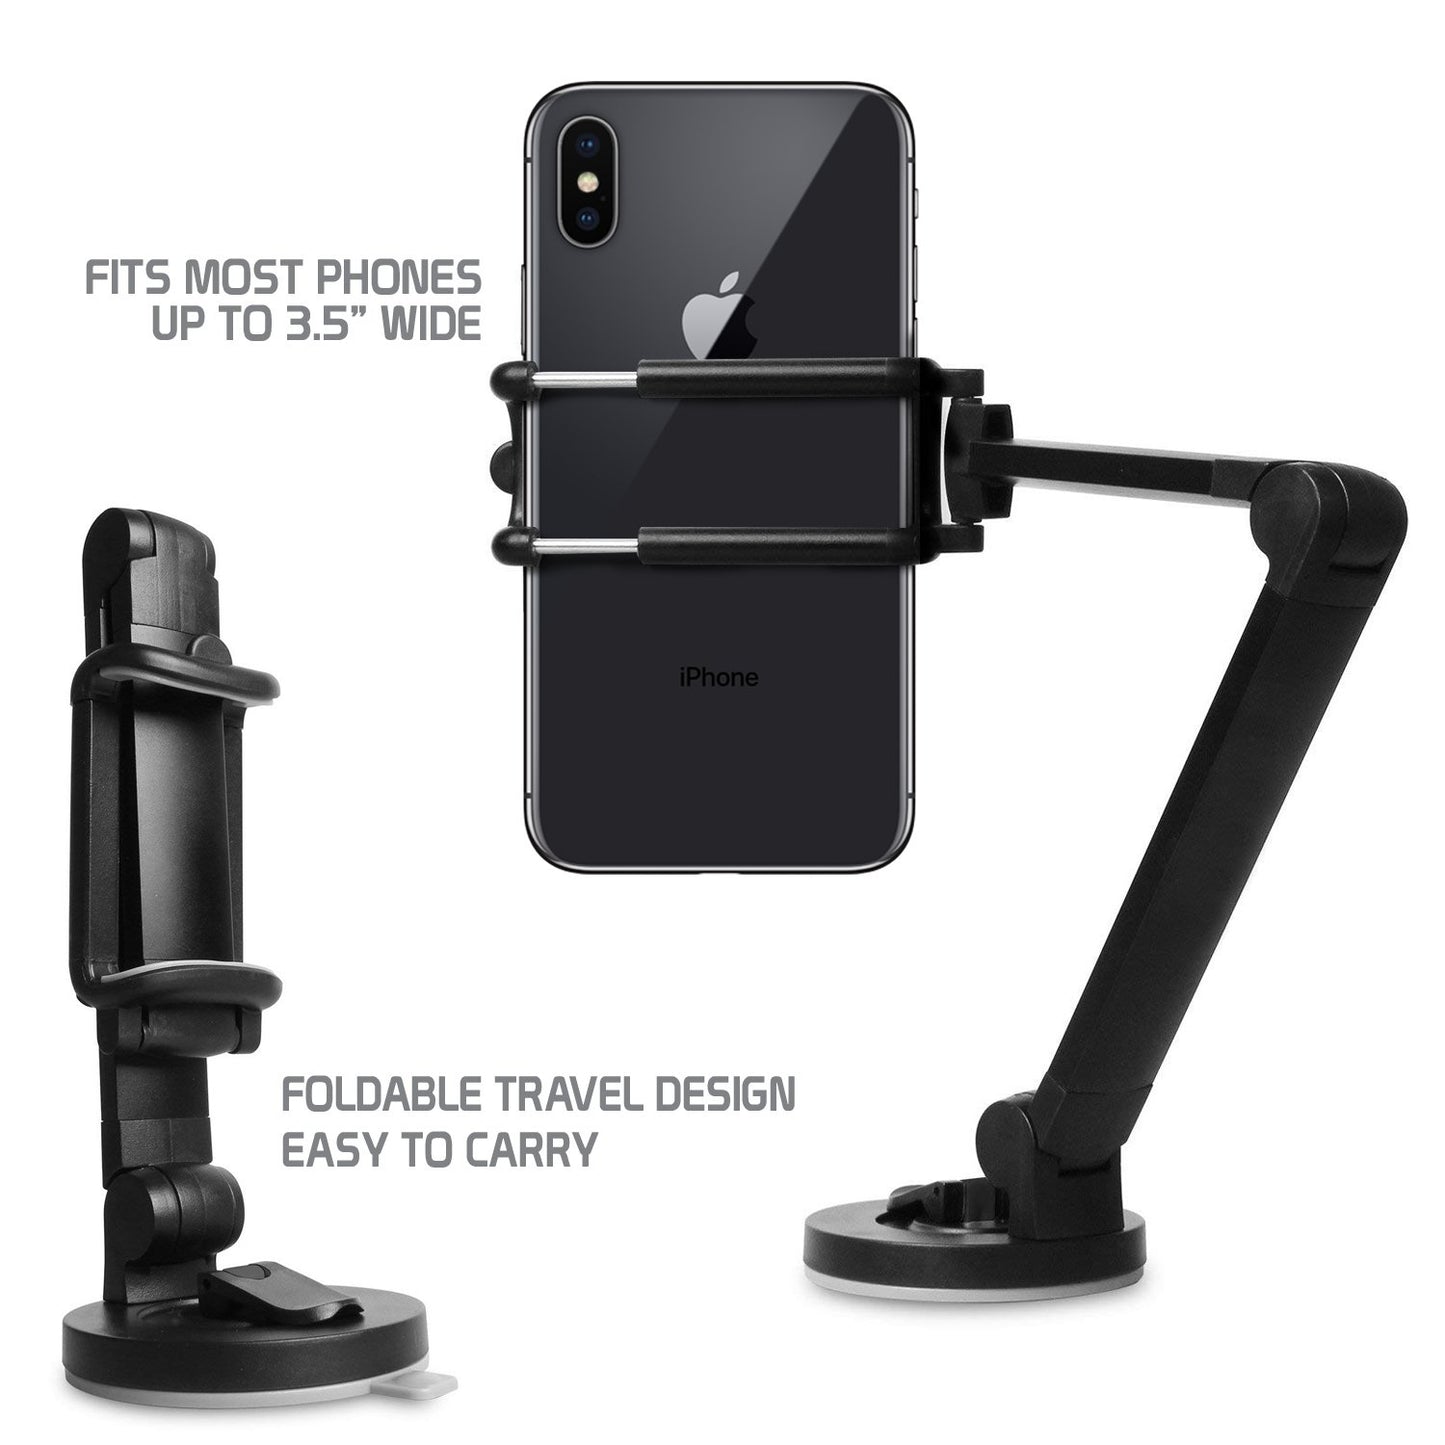 PH118ERG - Dashboard, Windshield and Desktop Phone Mount with 360 Degree Rotation and Adjustable Folding Arms for Smartphones